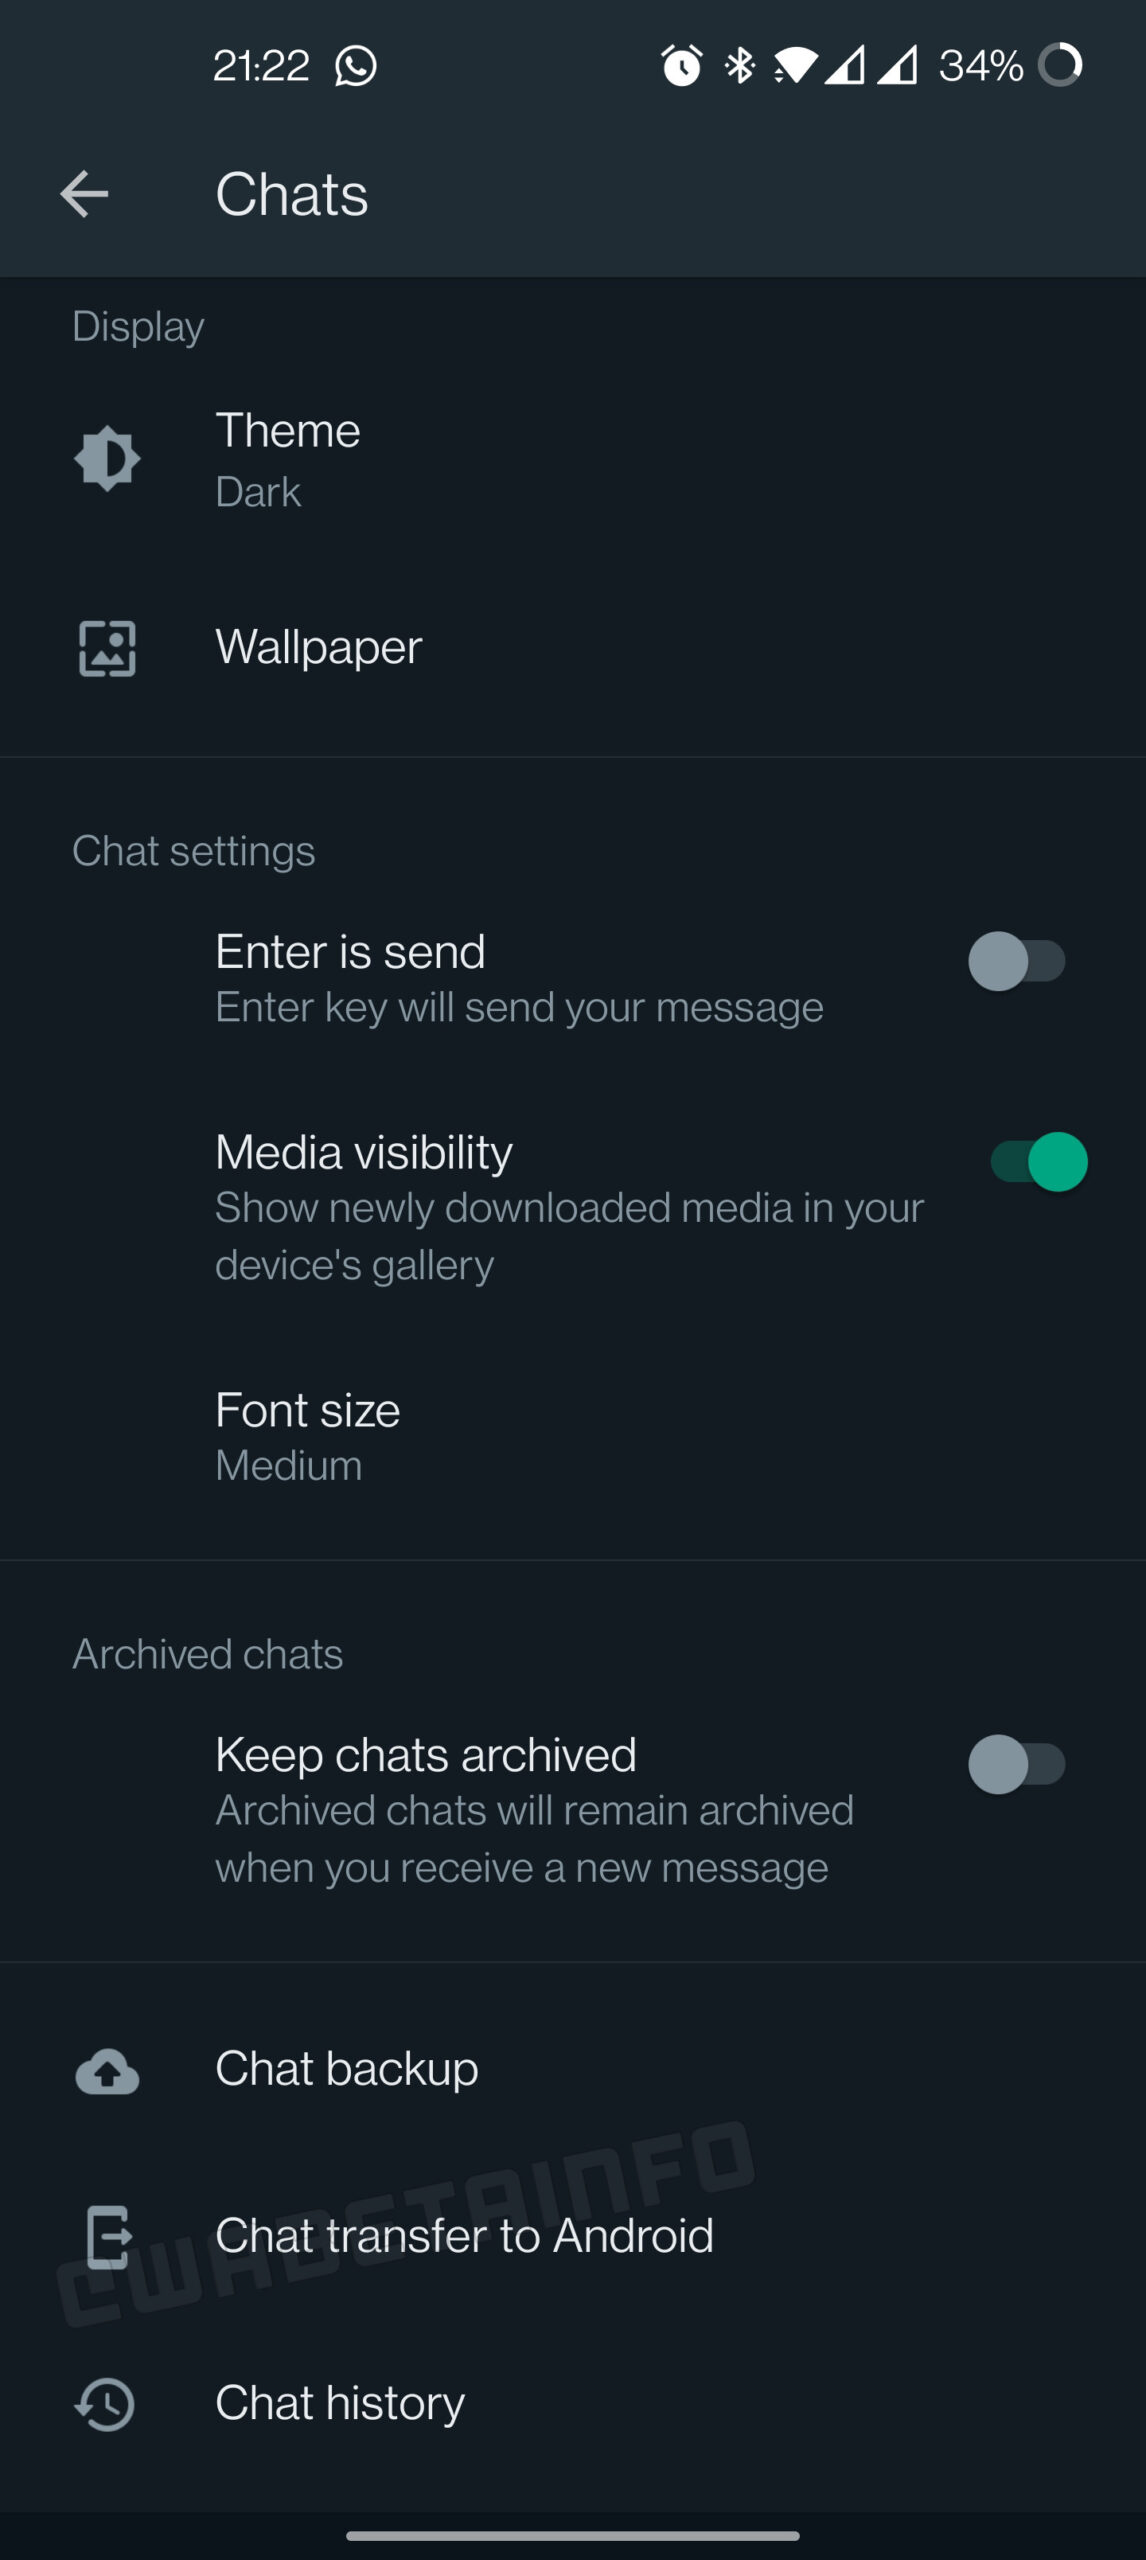 WA MOVE CHAT HISTORY OPTION ANDROID scaled 1146x2560x